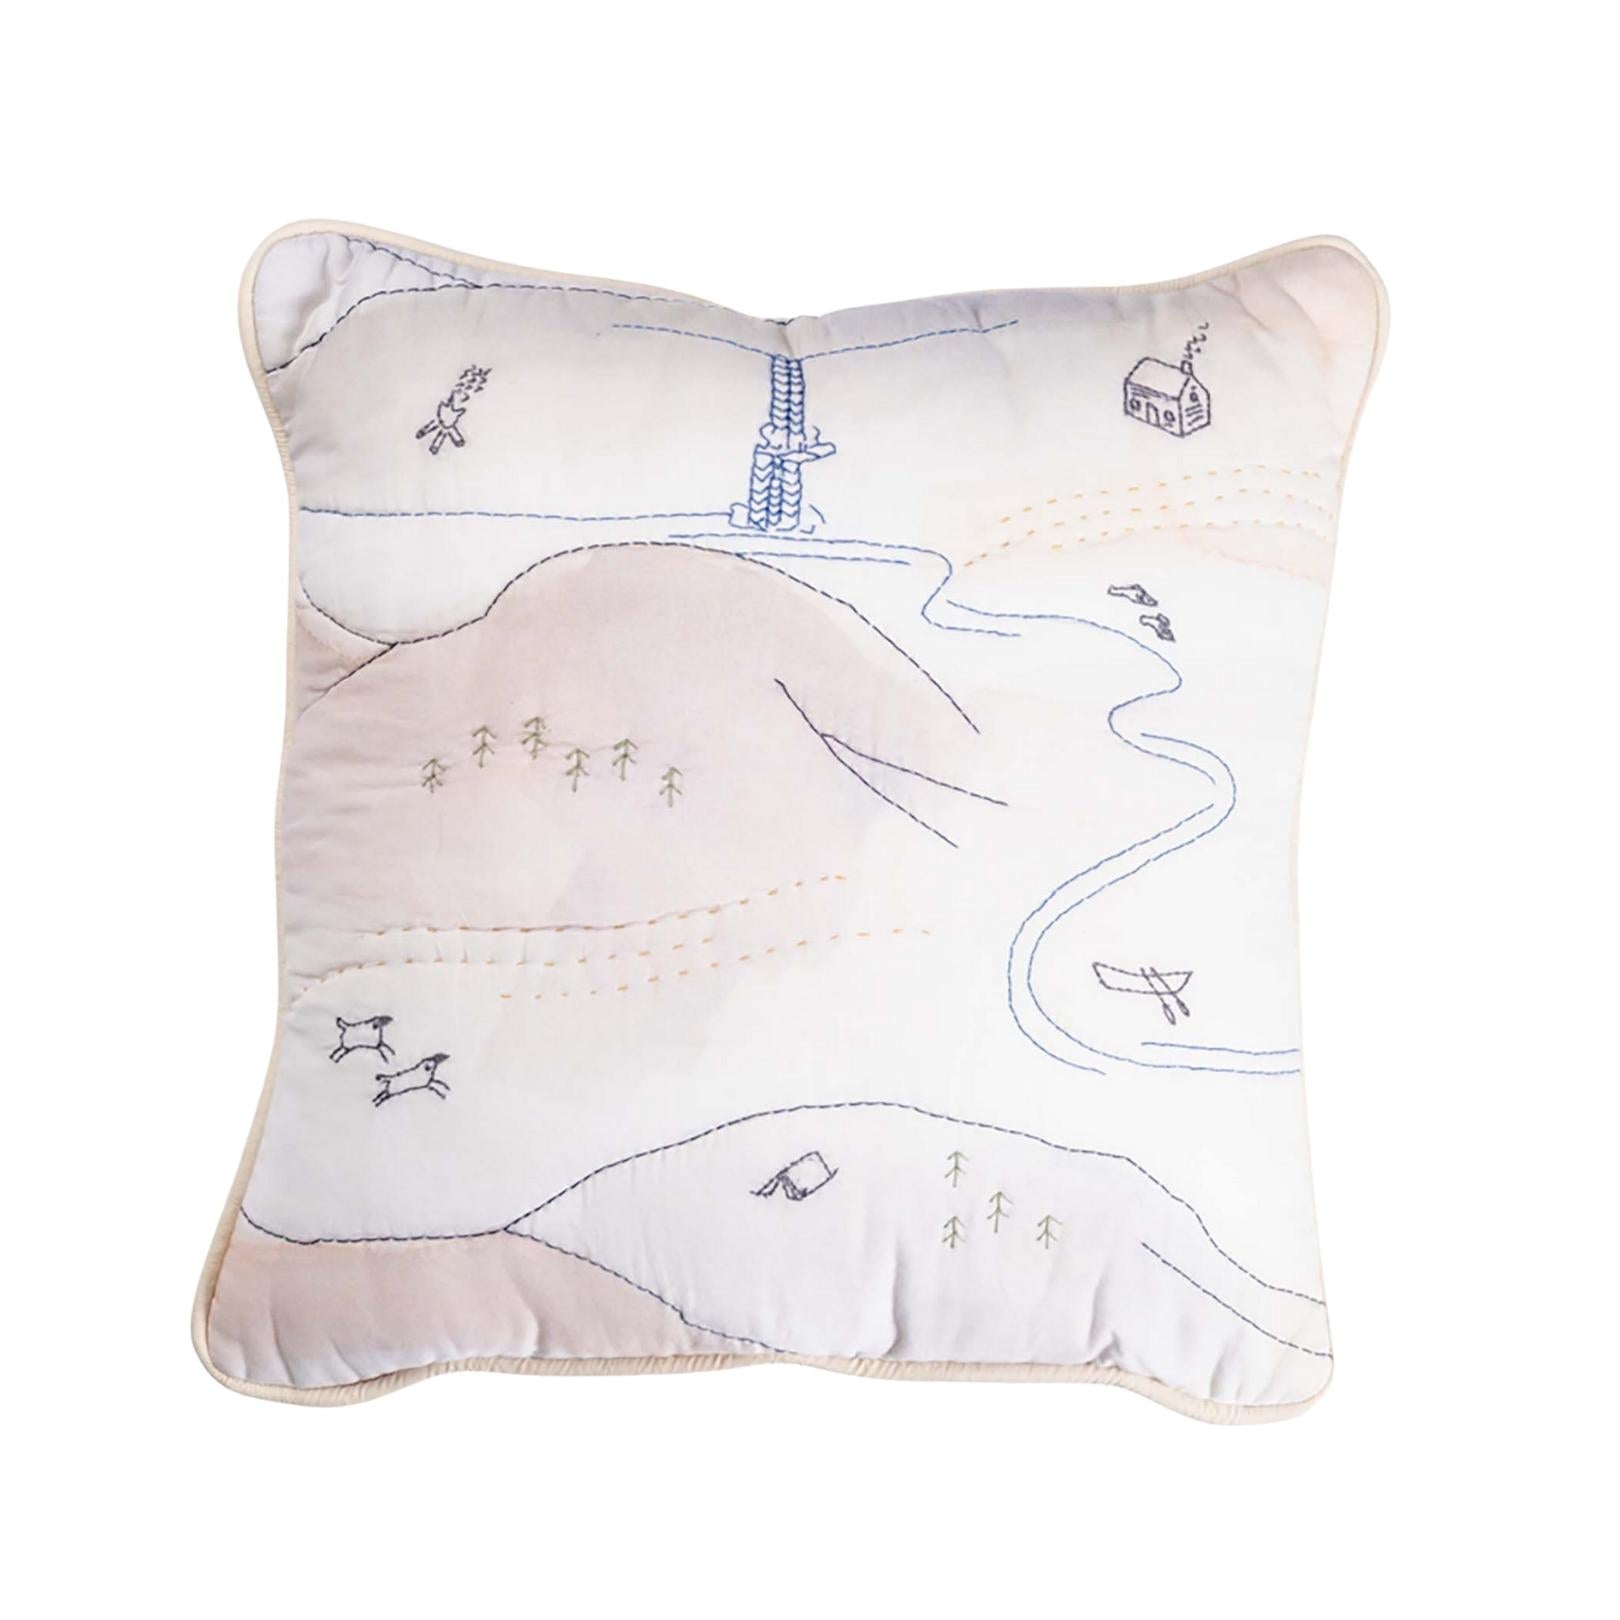 Haptic Lab embroidered pillow with mountain stream and waterfall